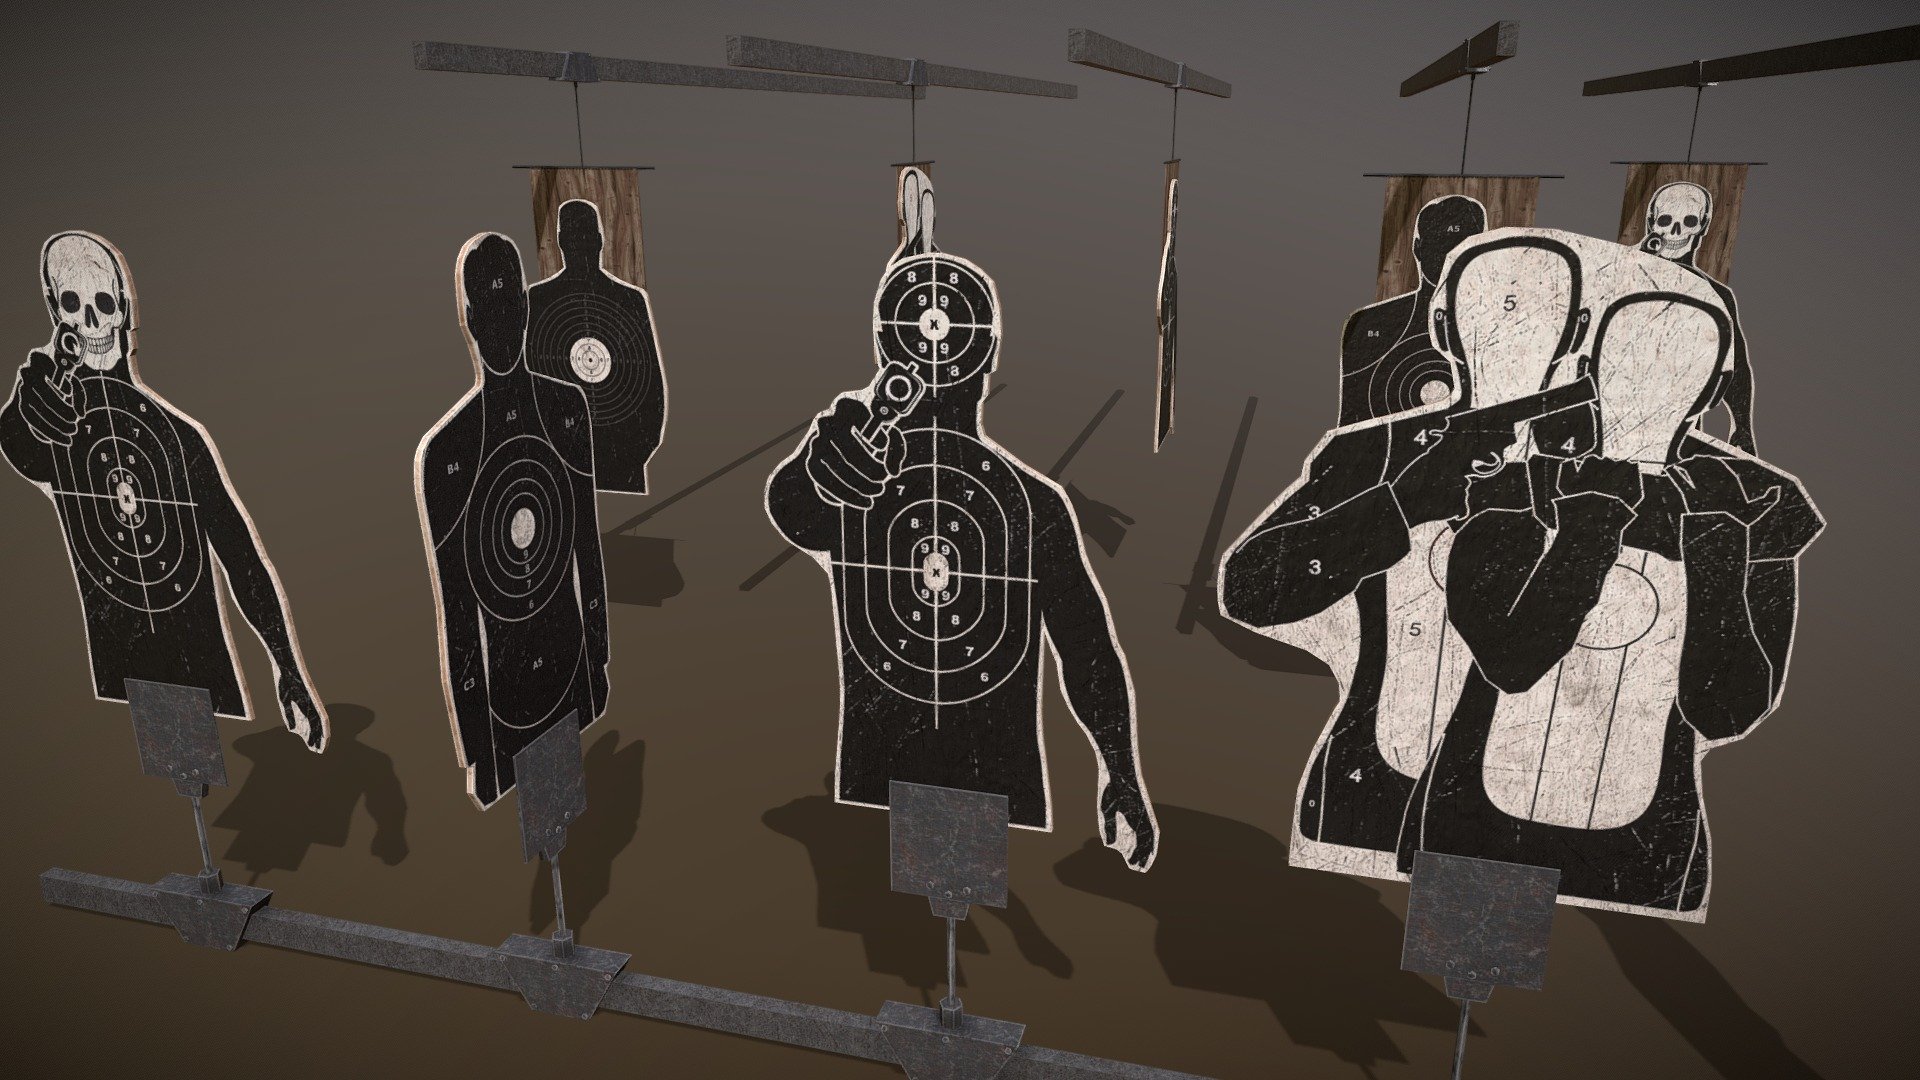 Very Detailed Shooting Targets Pack,great for any game genre.Create stunning environments using these assets for your own game.

Package contains:




Unity 3D (.unitypackage, .prefab) 

5 targets and 2 mechanisms for moving;

Every part can be easily animated;

All of the Textures are 2048x2048 PNGs;

File Formats : 
.FBX
.OBJ
.DAE
.blend

Contact: mr.rusel1999@mail.ru - Shooting Targets Pack - 3D model by ANRUVAL_3D_MODELS 3d model